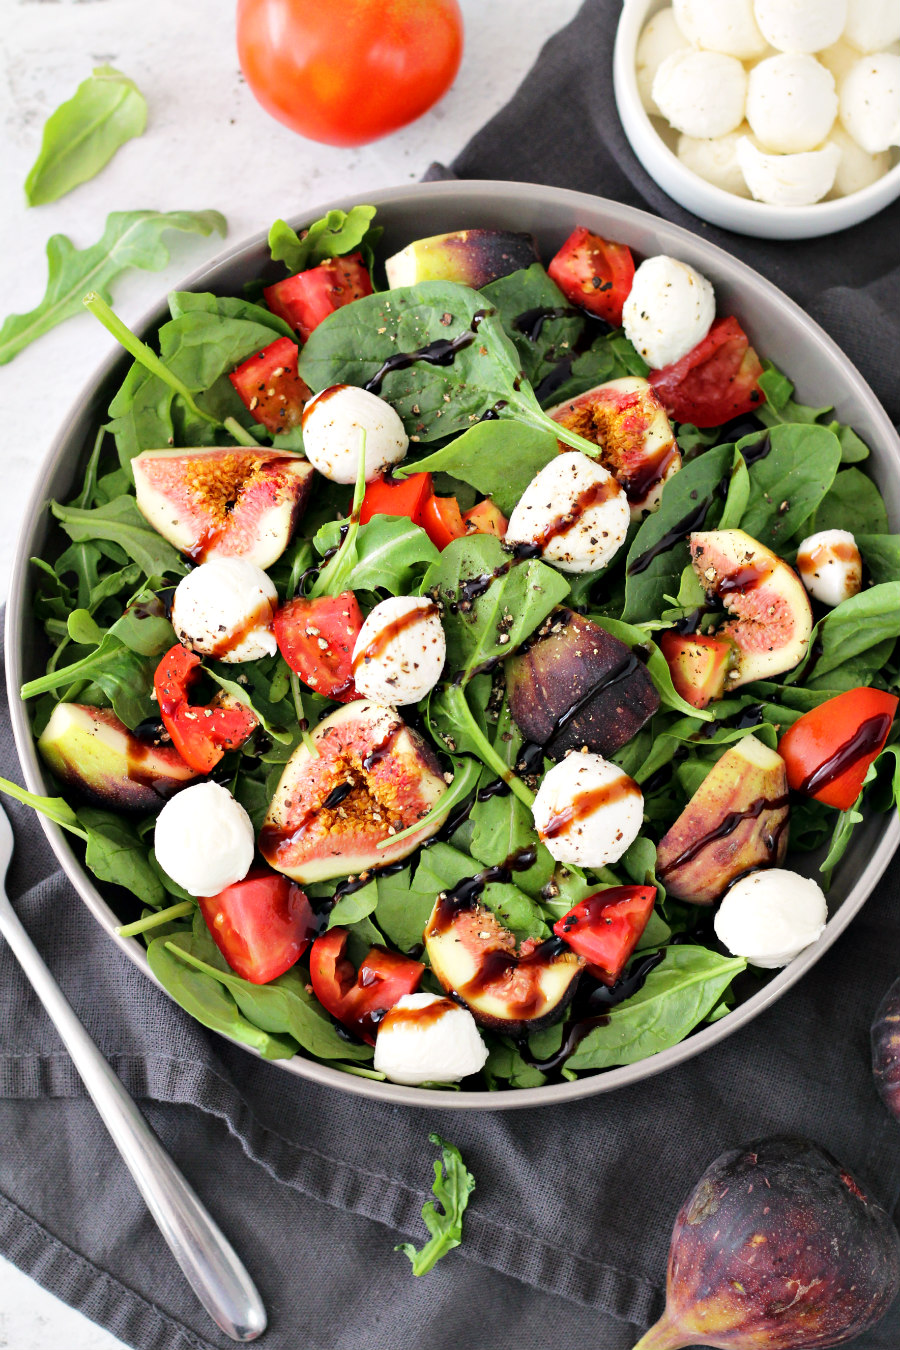 Flat lay photo of Trader Joe's Inspired Black Fig and Balsamic Salad pictured with fork, arugula leaves, tomato, fresh mozzarella balls, and a fresh fig.